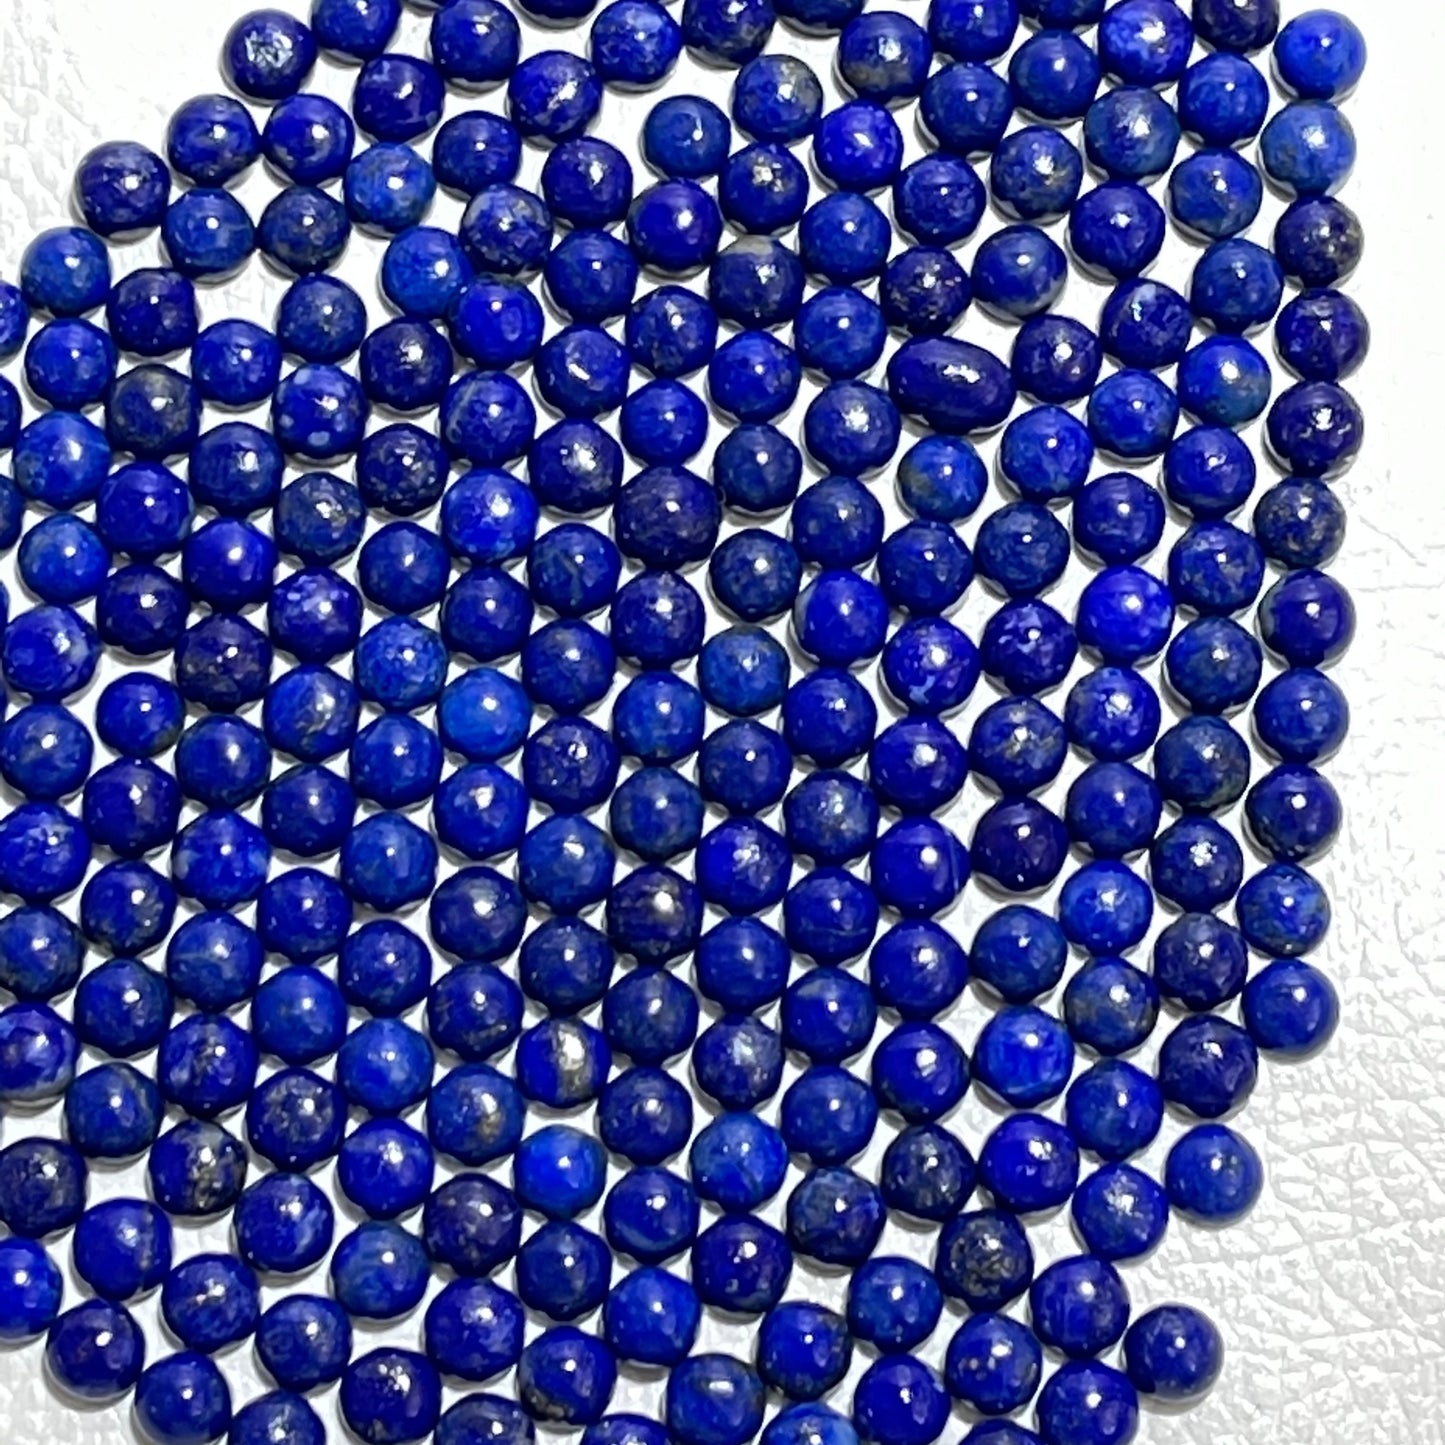 Discover the Beauty of Handcrafted Lapis Lazuli 5mm Round Cabochons - High-Quality Gems for Jewelry Designers and Collectors (Natural)